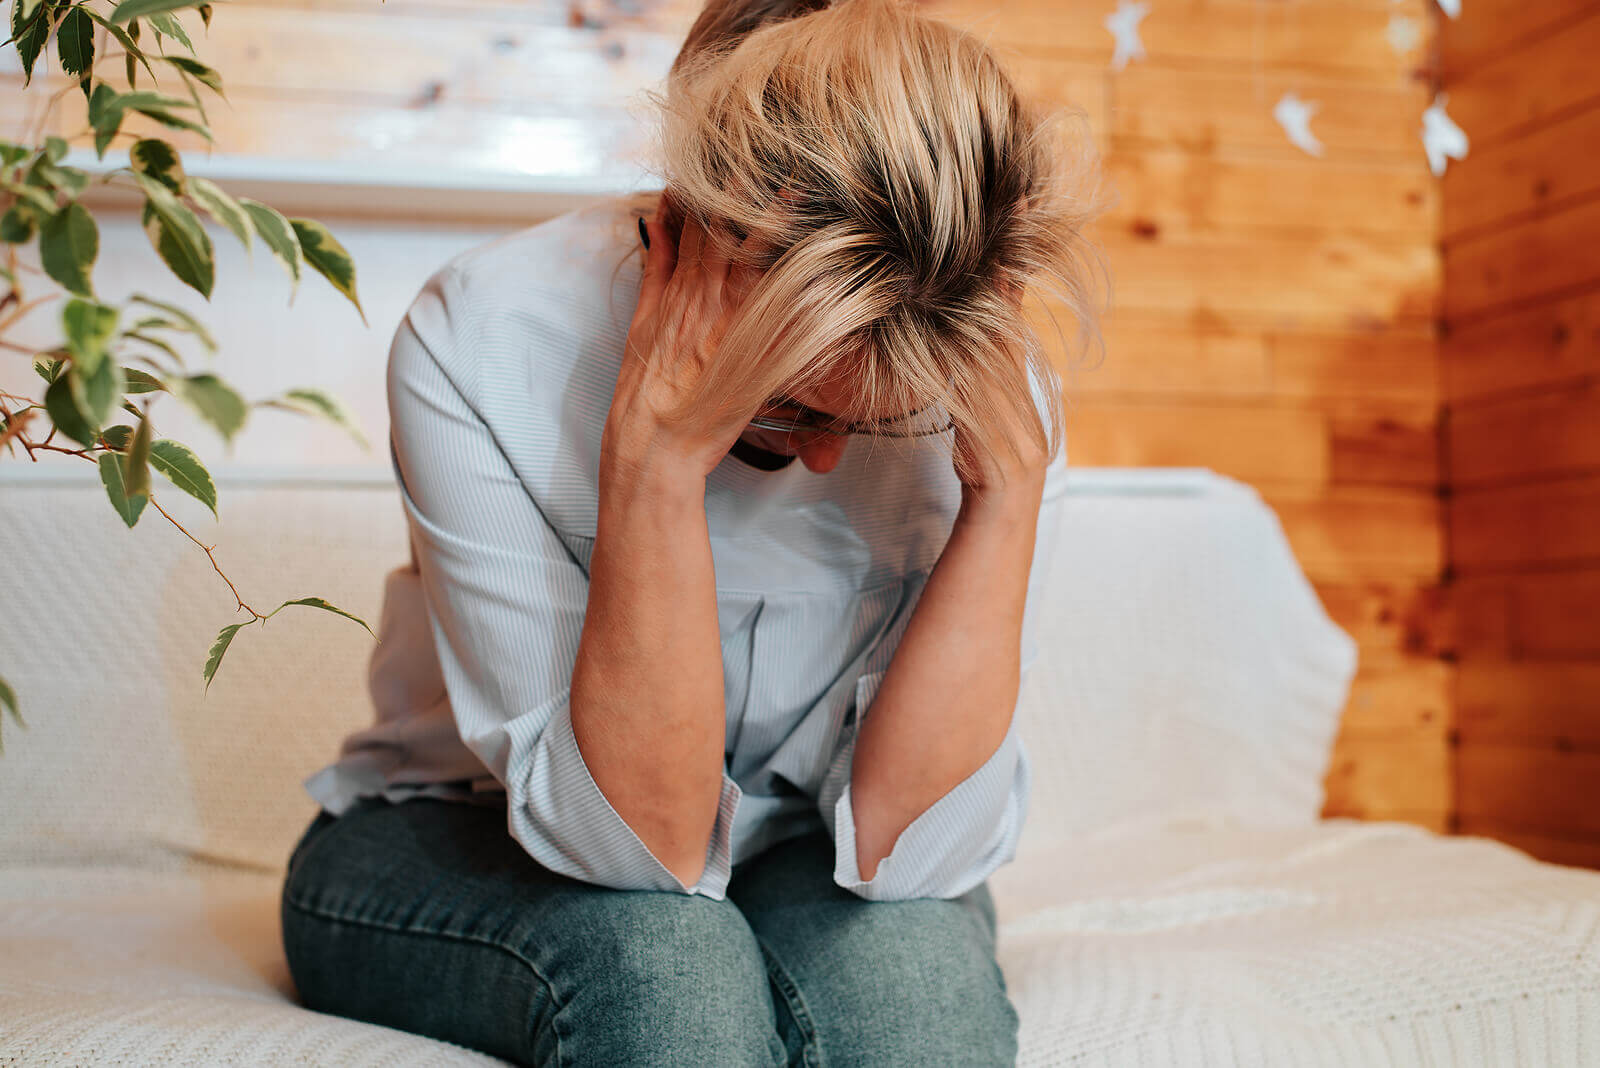 A woman holds her face while sitting on a couch. Looking to get past your relational trauma in Austin, TX? Speak with a trauma therapist in Texas today to get the help you need!